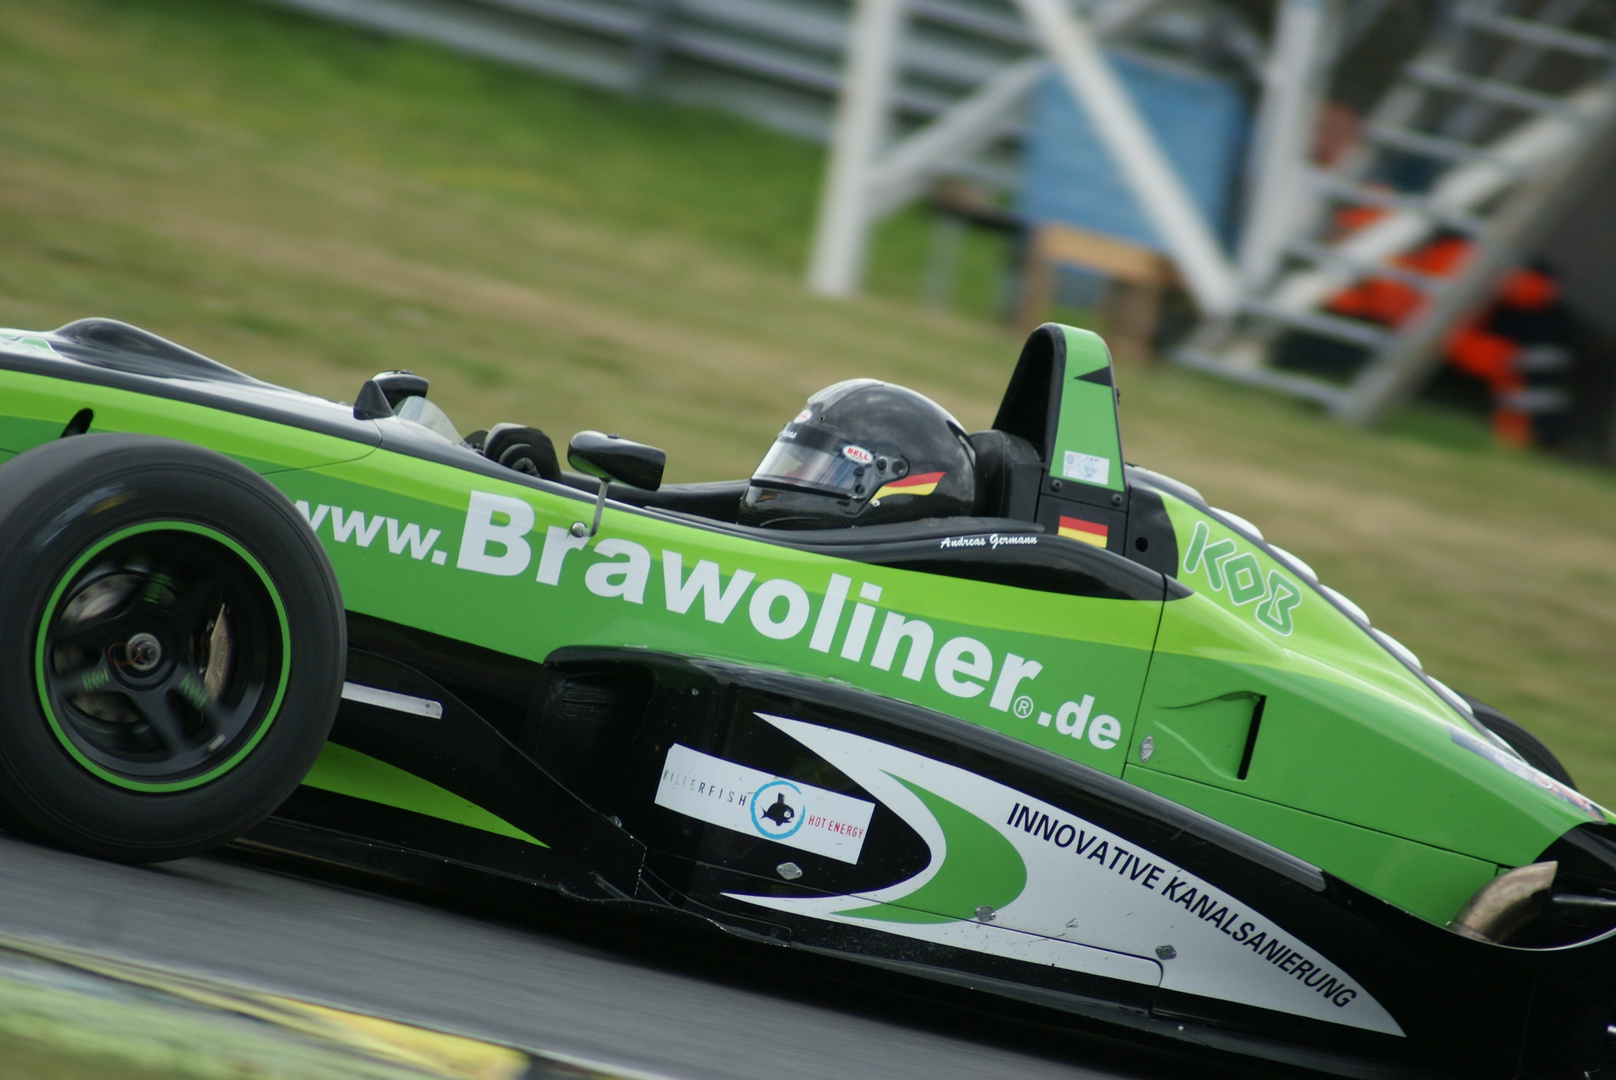 KOB Brawoliner in Most Formel 3